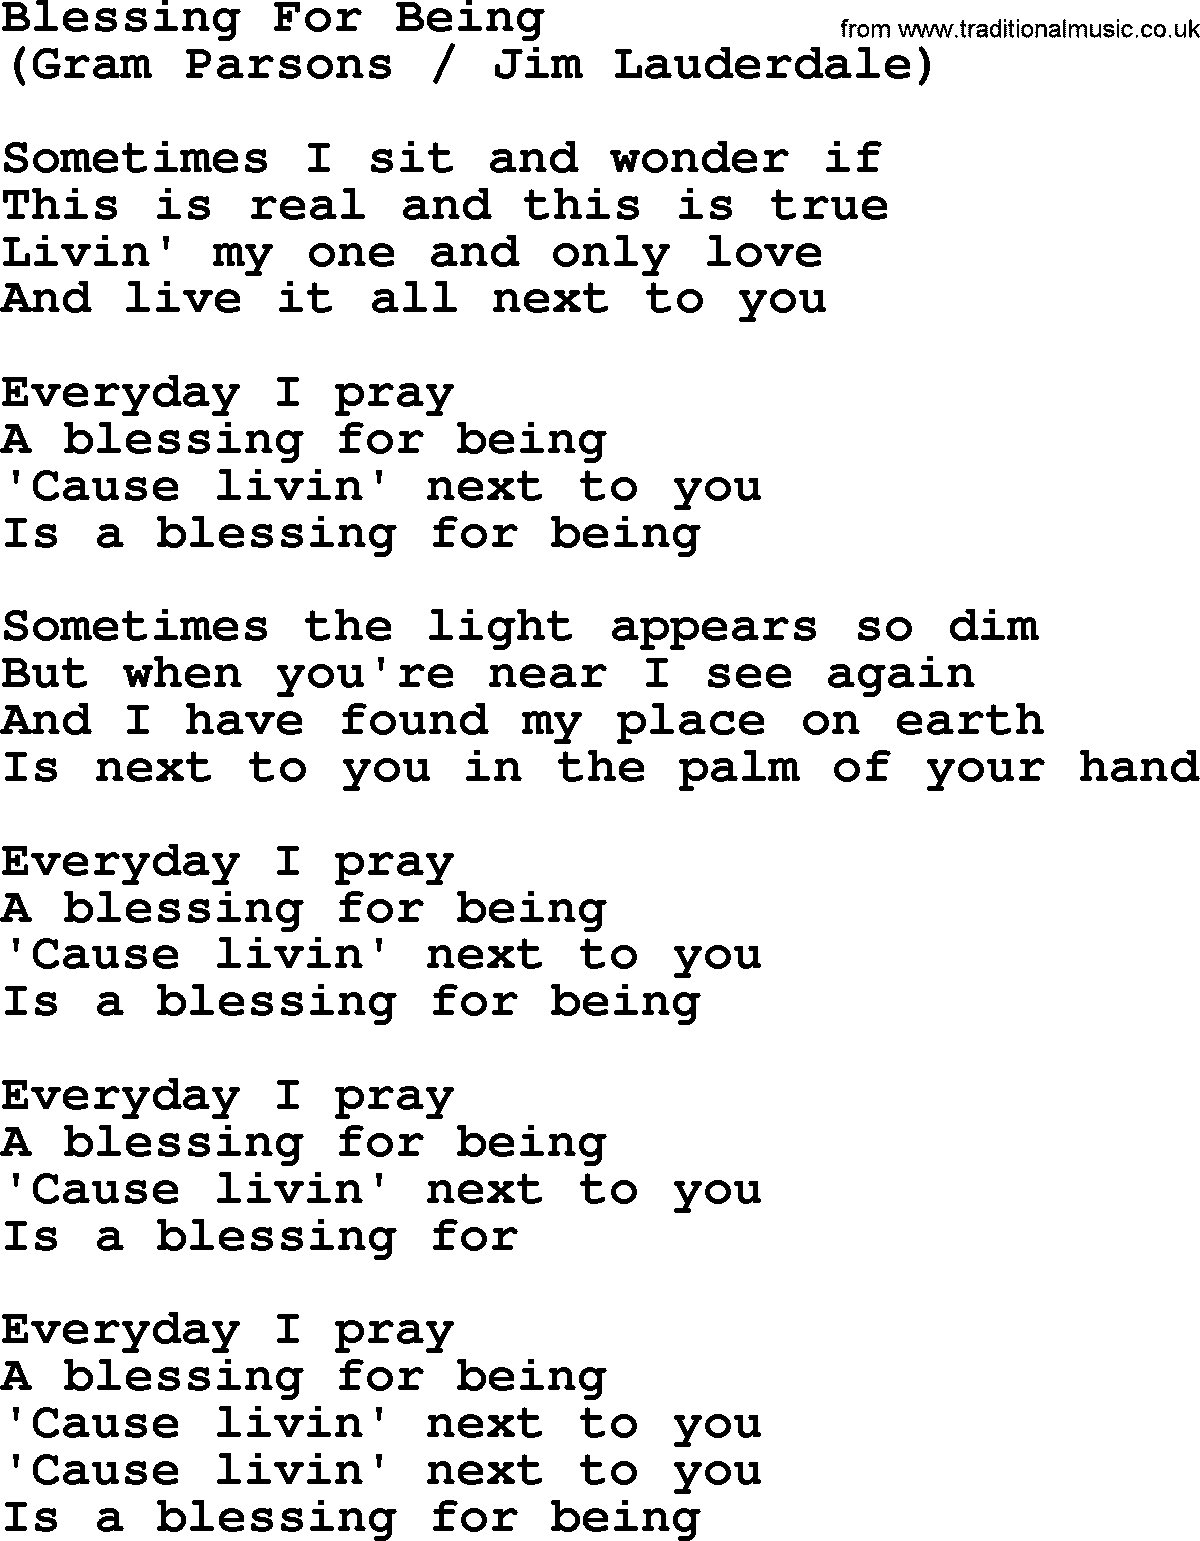 The Byrds song Blessing For Being, lyrics